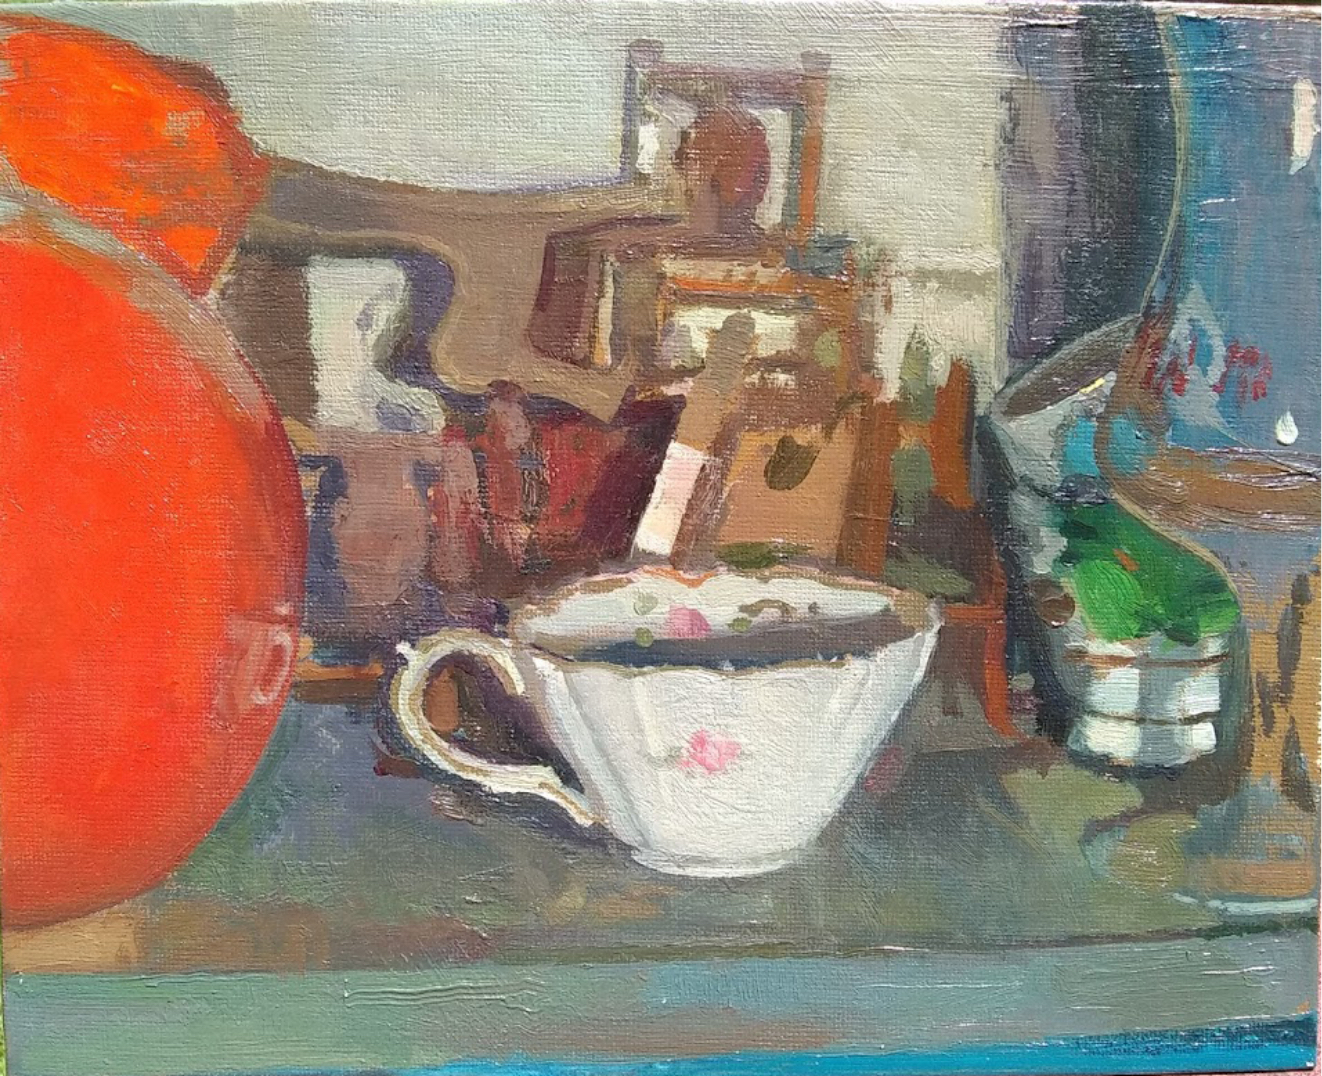 Tea Cup / oil on canvas board / 8" x 10" / 2020 / Private Collection